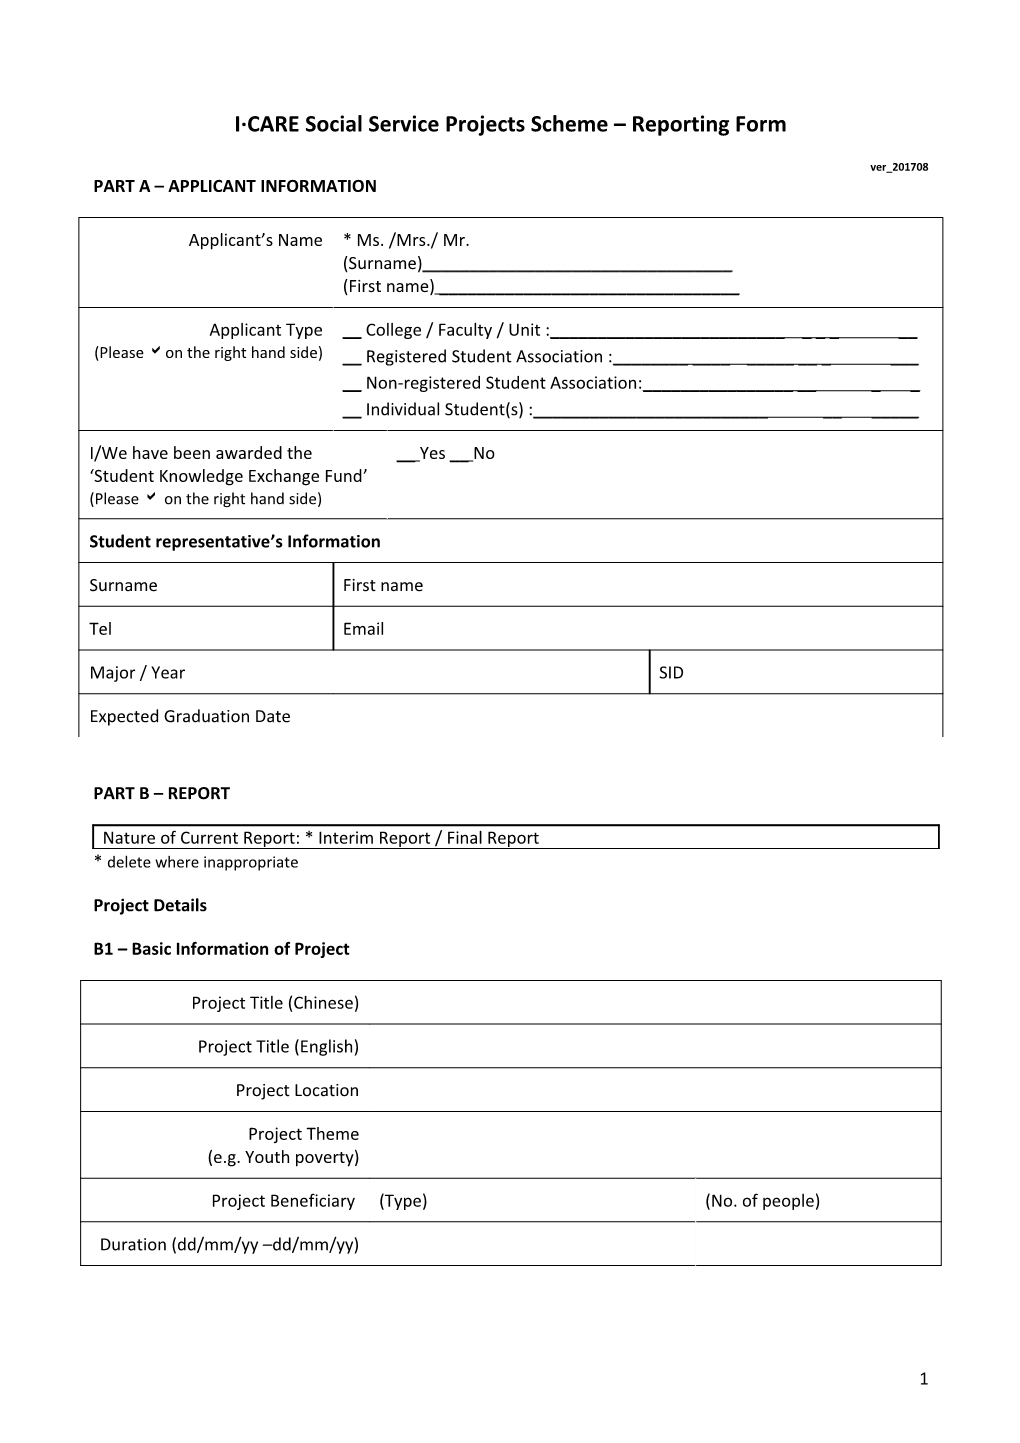 I CARE Social Service Projects Scheme Reporting Form